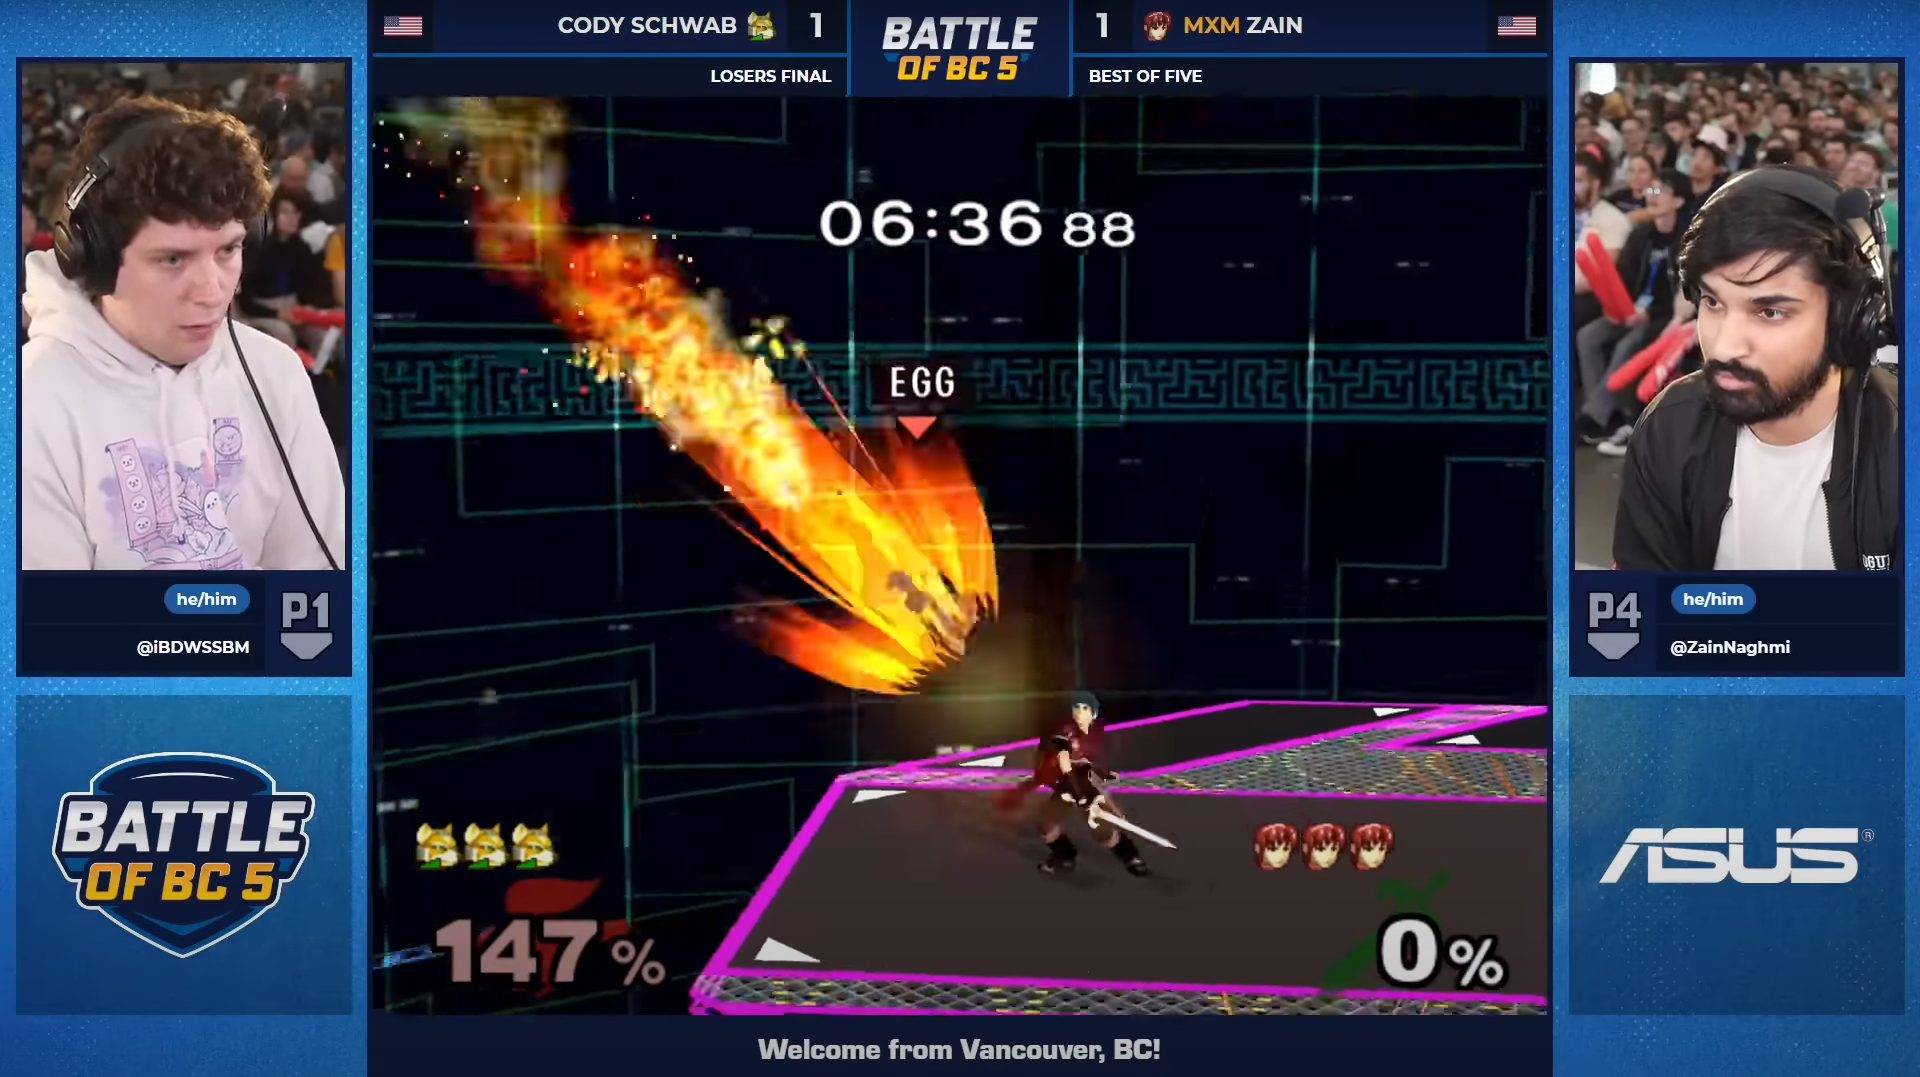 Melee game scene from the Battle of BC 5 stream